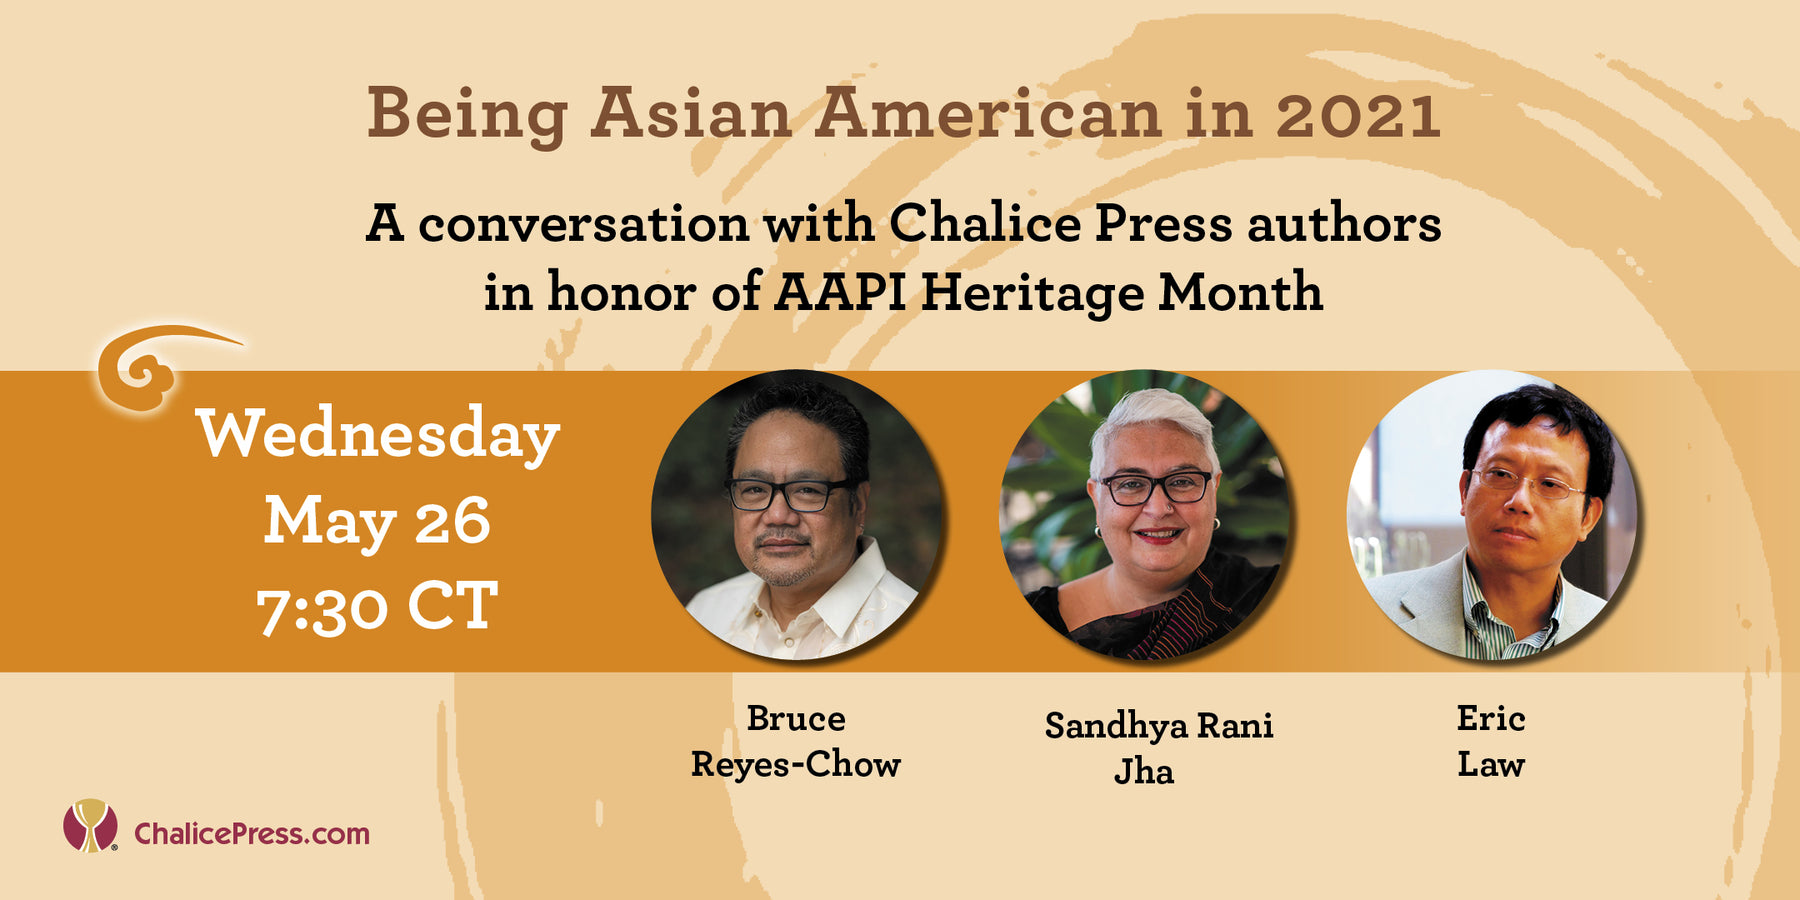 Being Asian American in 2021: An Online Conversation with Chalice Press Authors